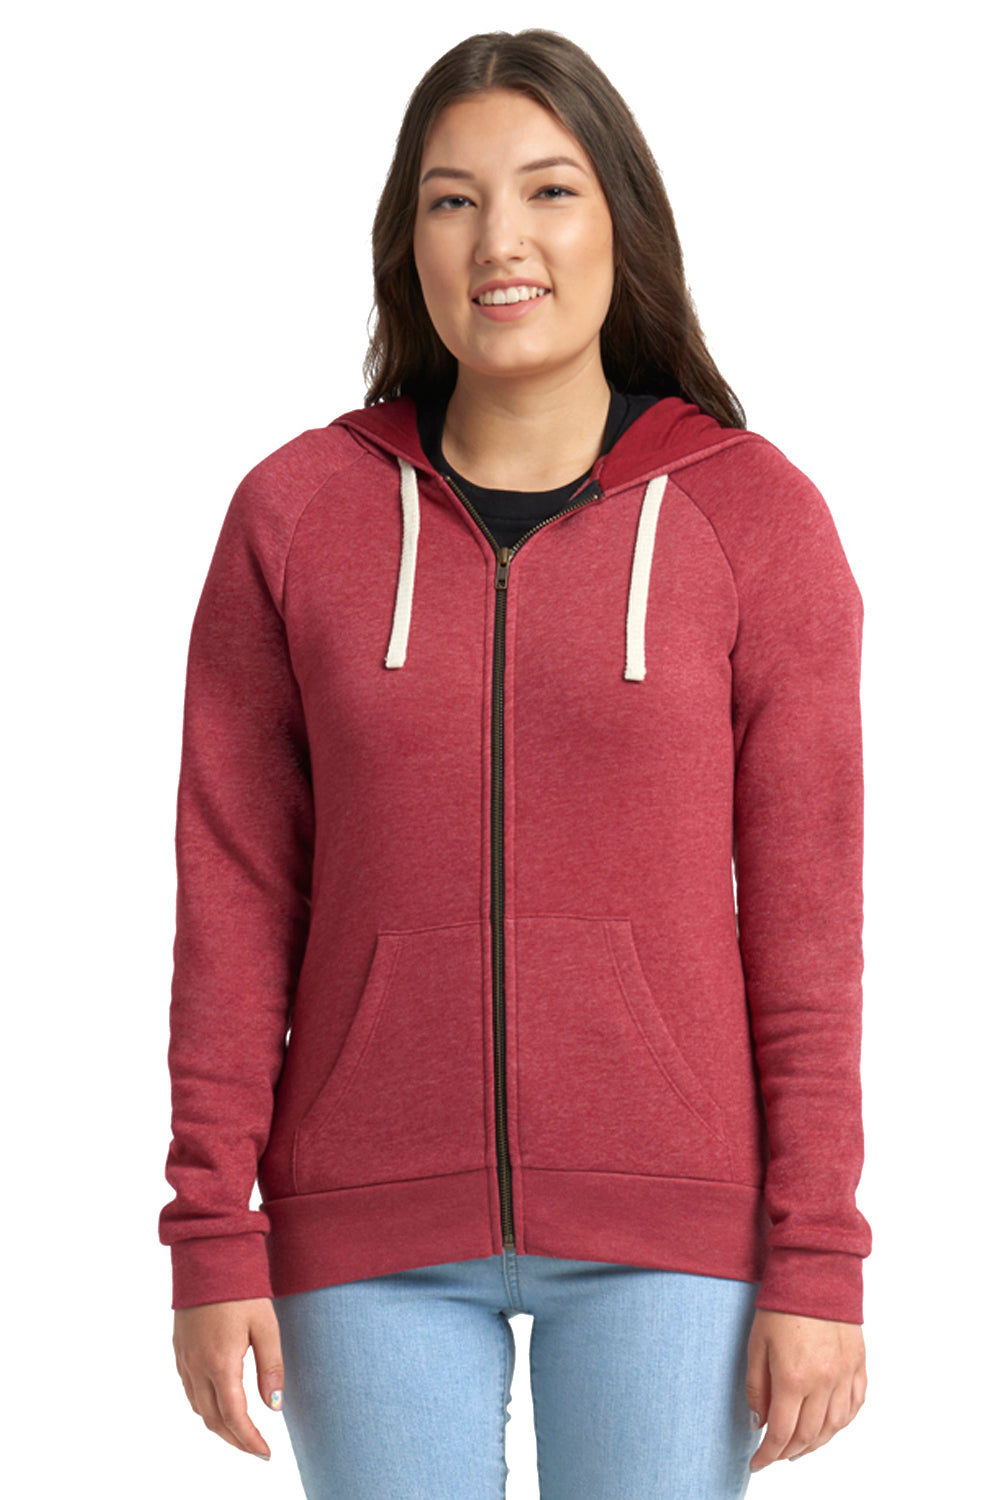 Women's New Era Red St. Louis Cardinals Colorblock Full-Zip Hoodie Size: Extra Small